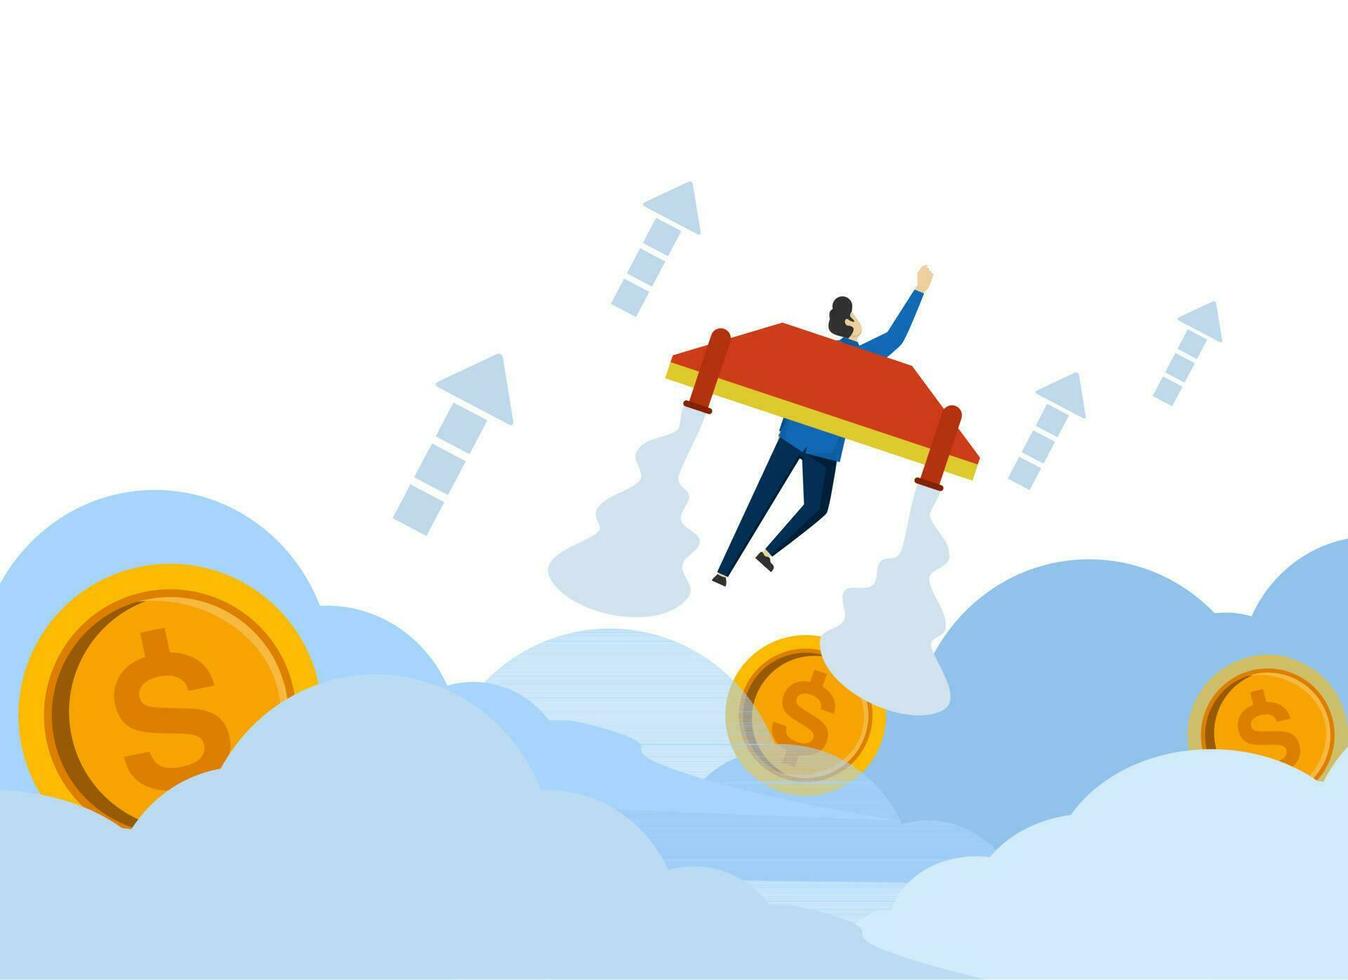 Starting and Increasing Motivation New business concept moving up, how to reach the goal. Concept of reaching destination on jet pack. Flat vector illustration on a white background.